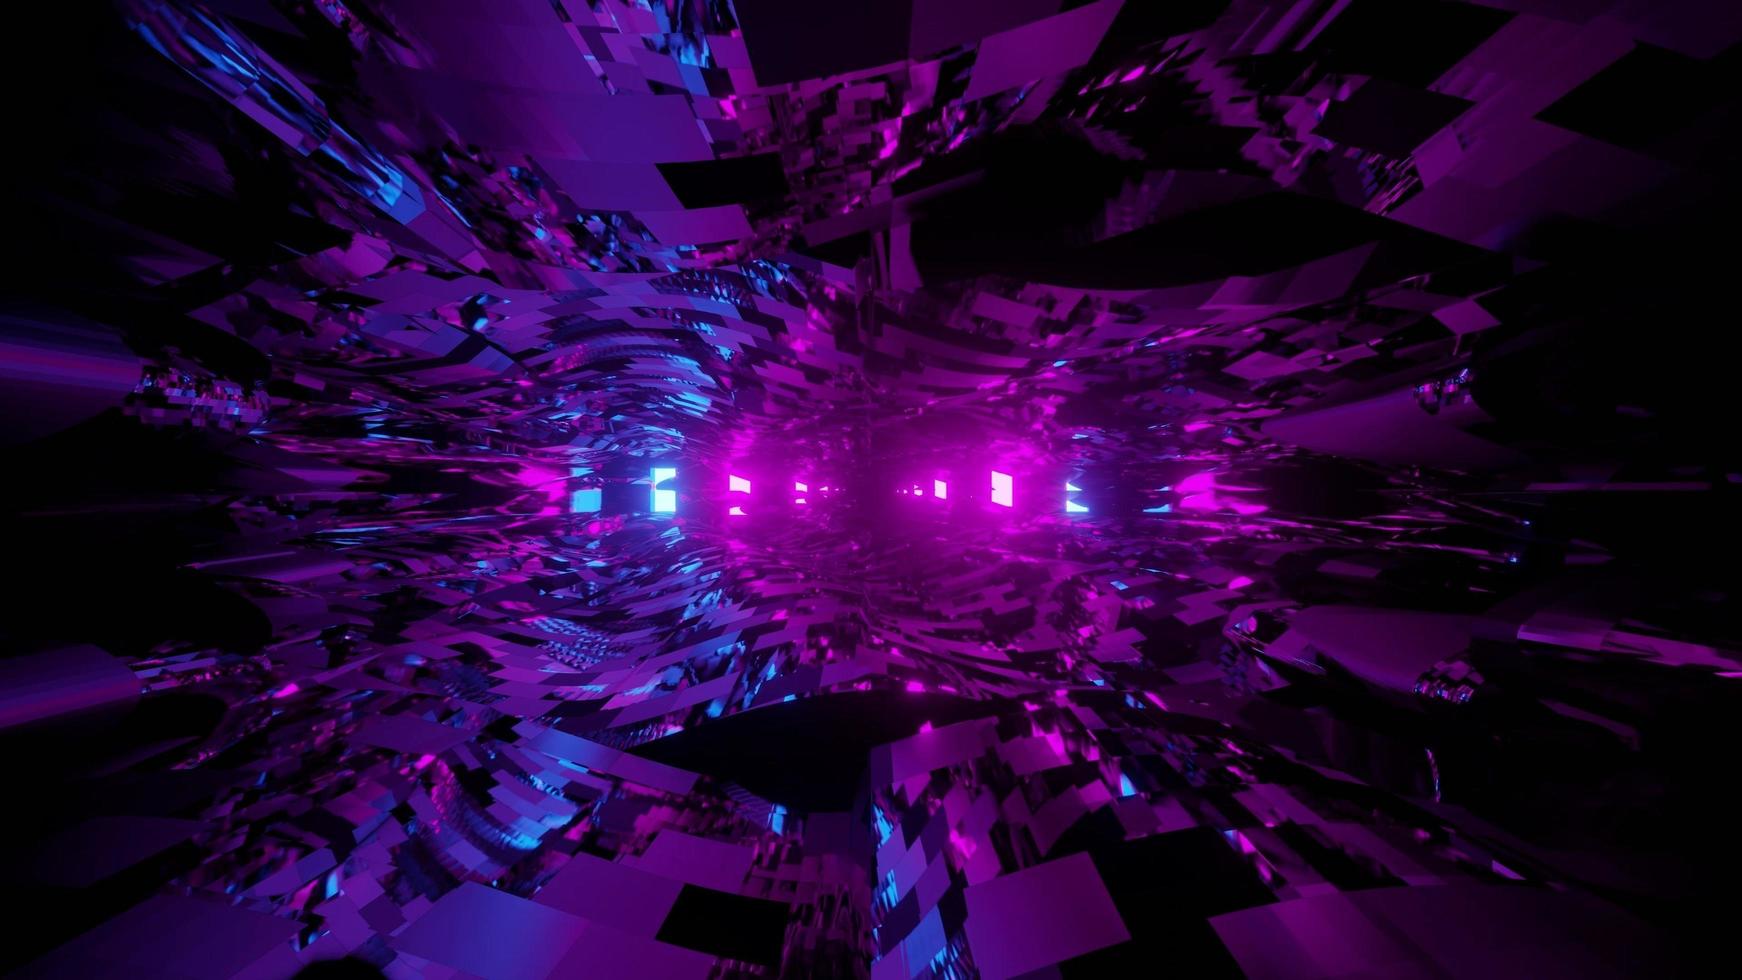 Abstract fuzzy 3d illustration of transparent waves against purple lights photo